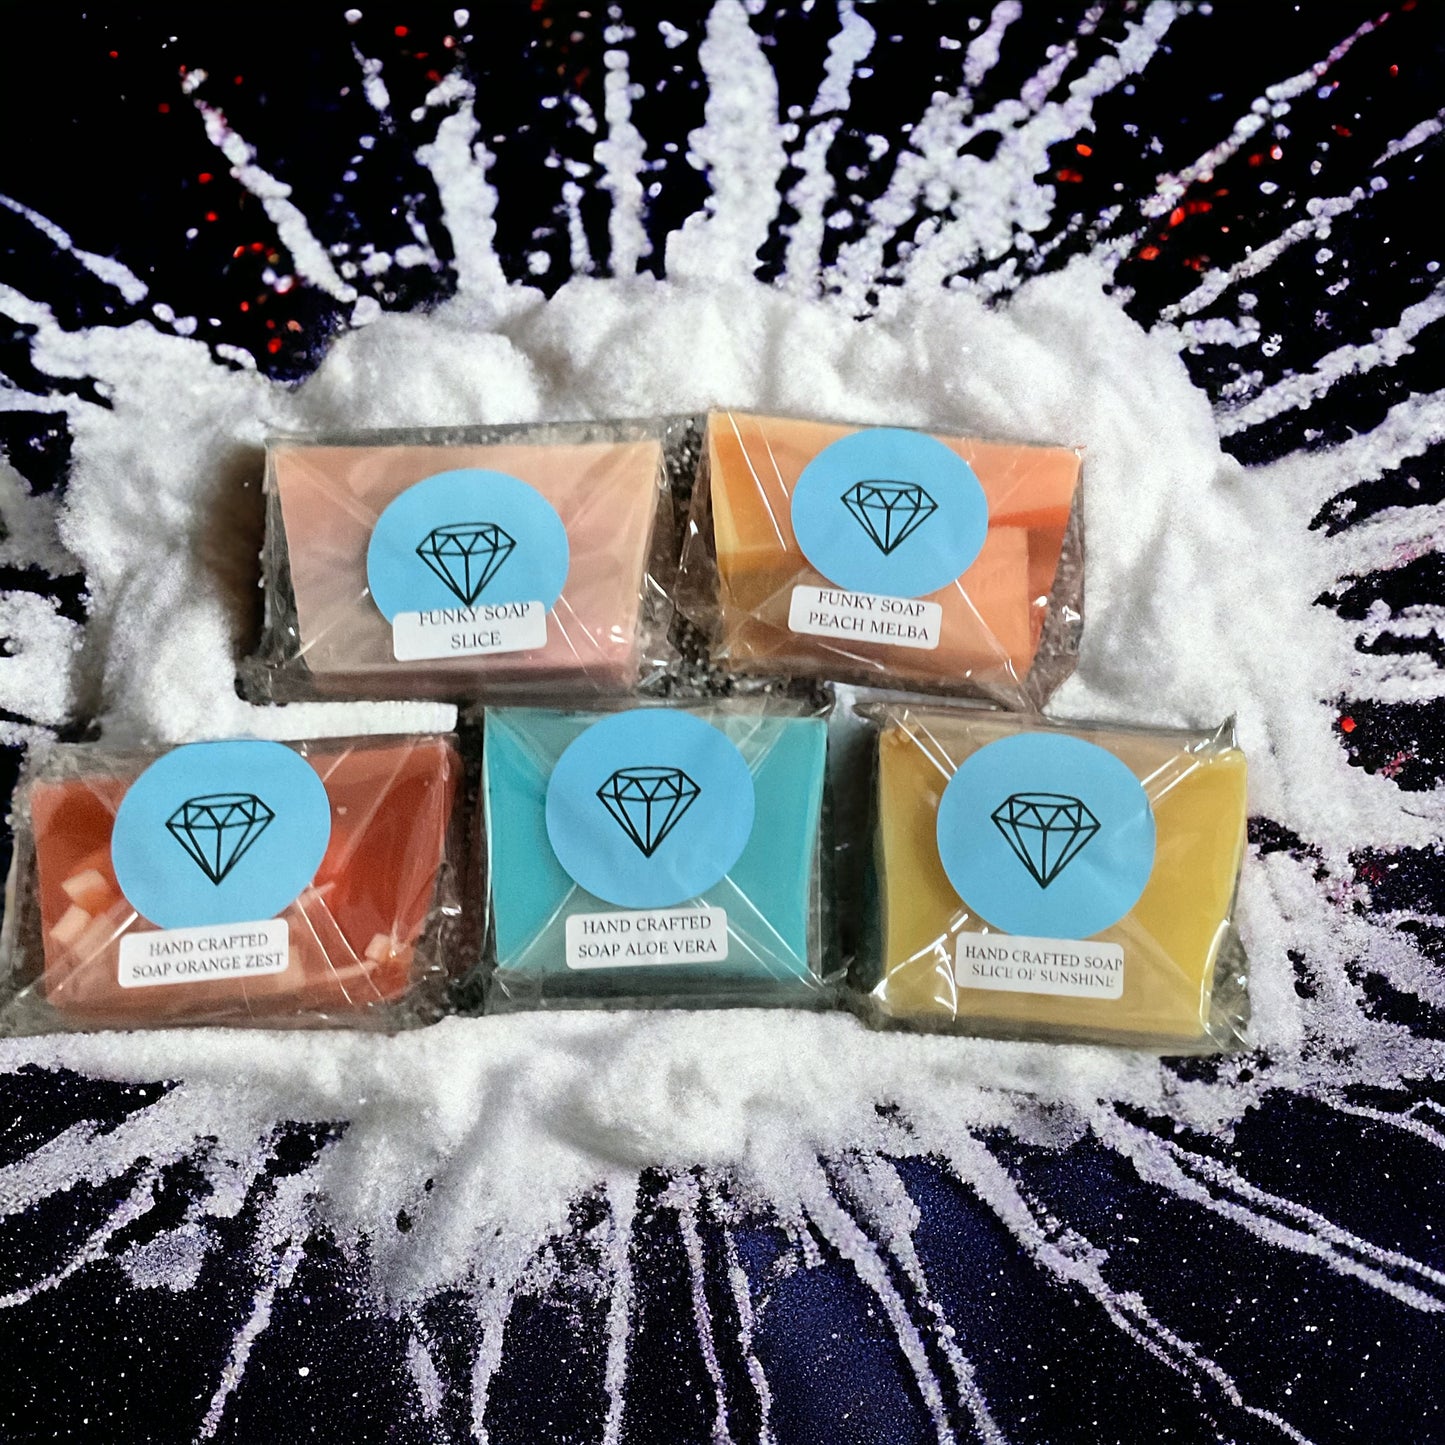 Deluxe handcrafted soaps gift set